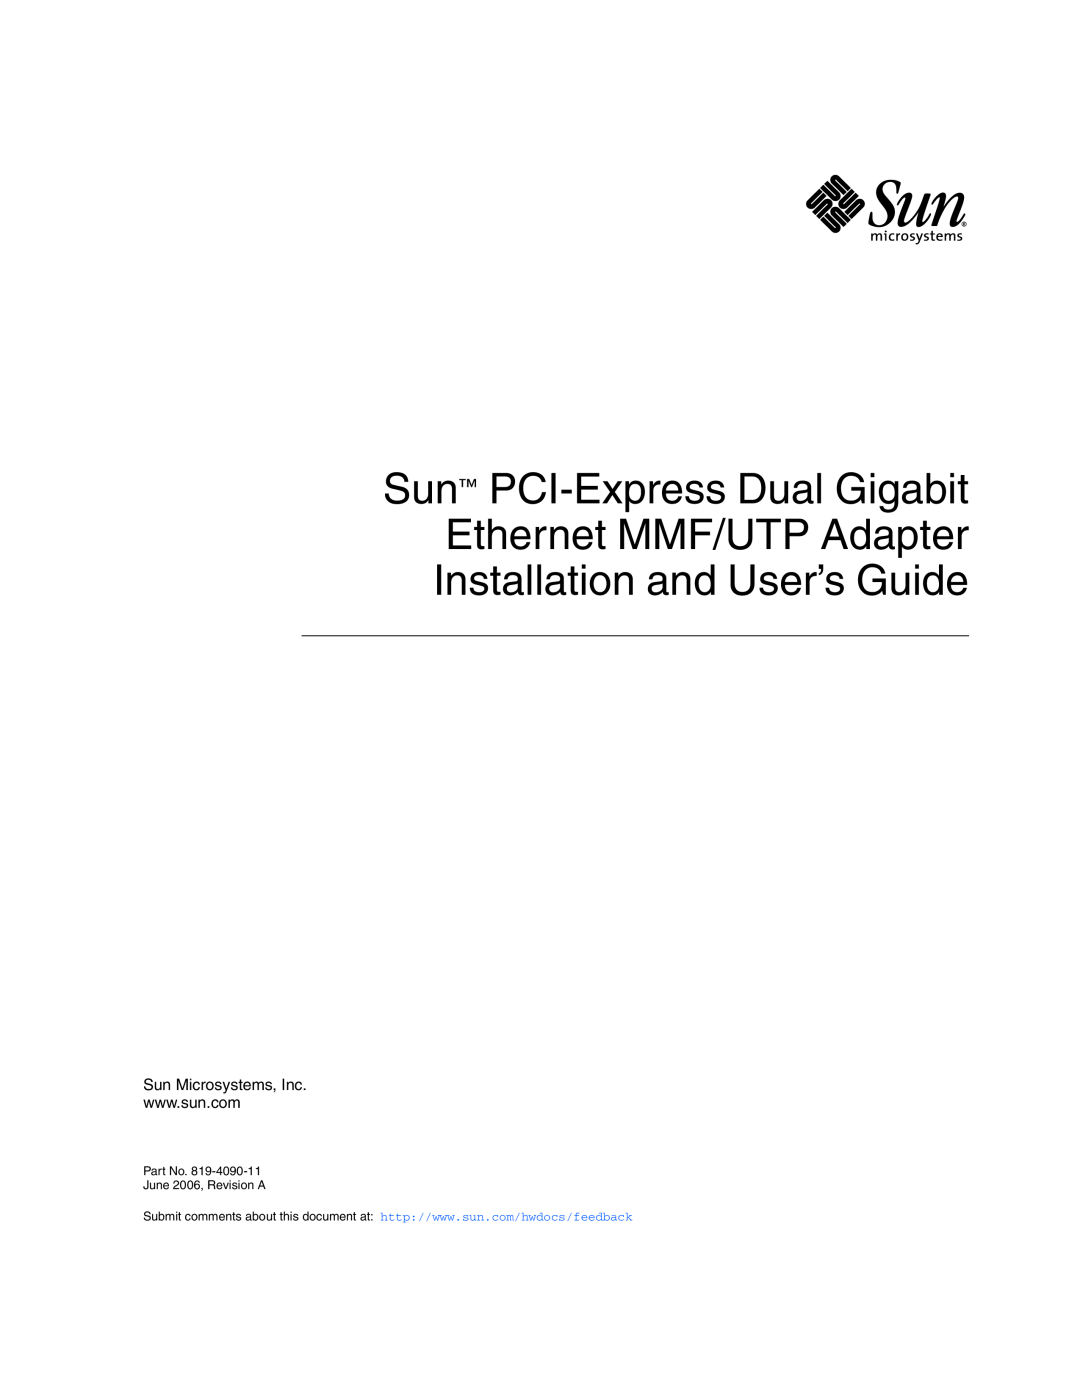 Sun Microsystems manual Sun PCI-Express Dual Gigabit Ethernet MMF/UTP Adapter, Installation and User’s Guide 